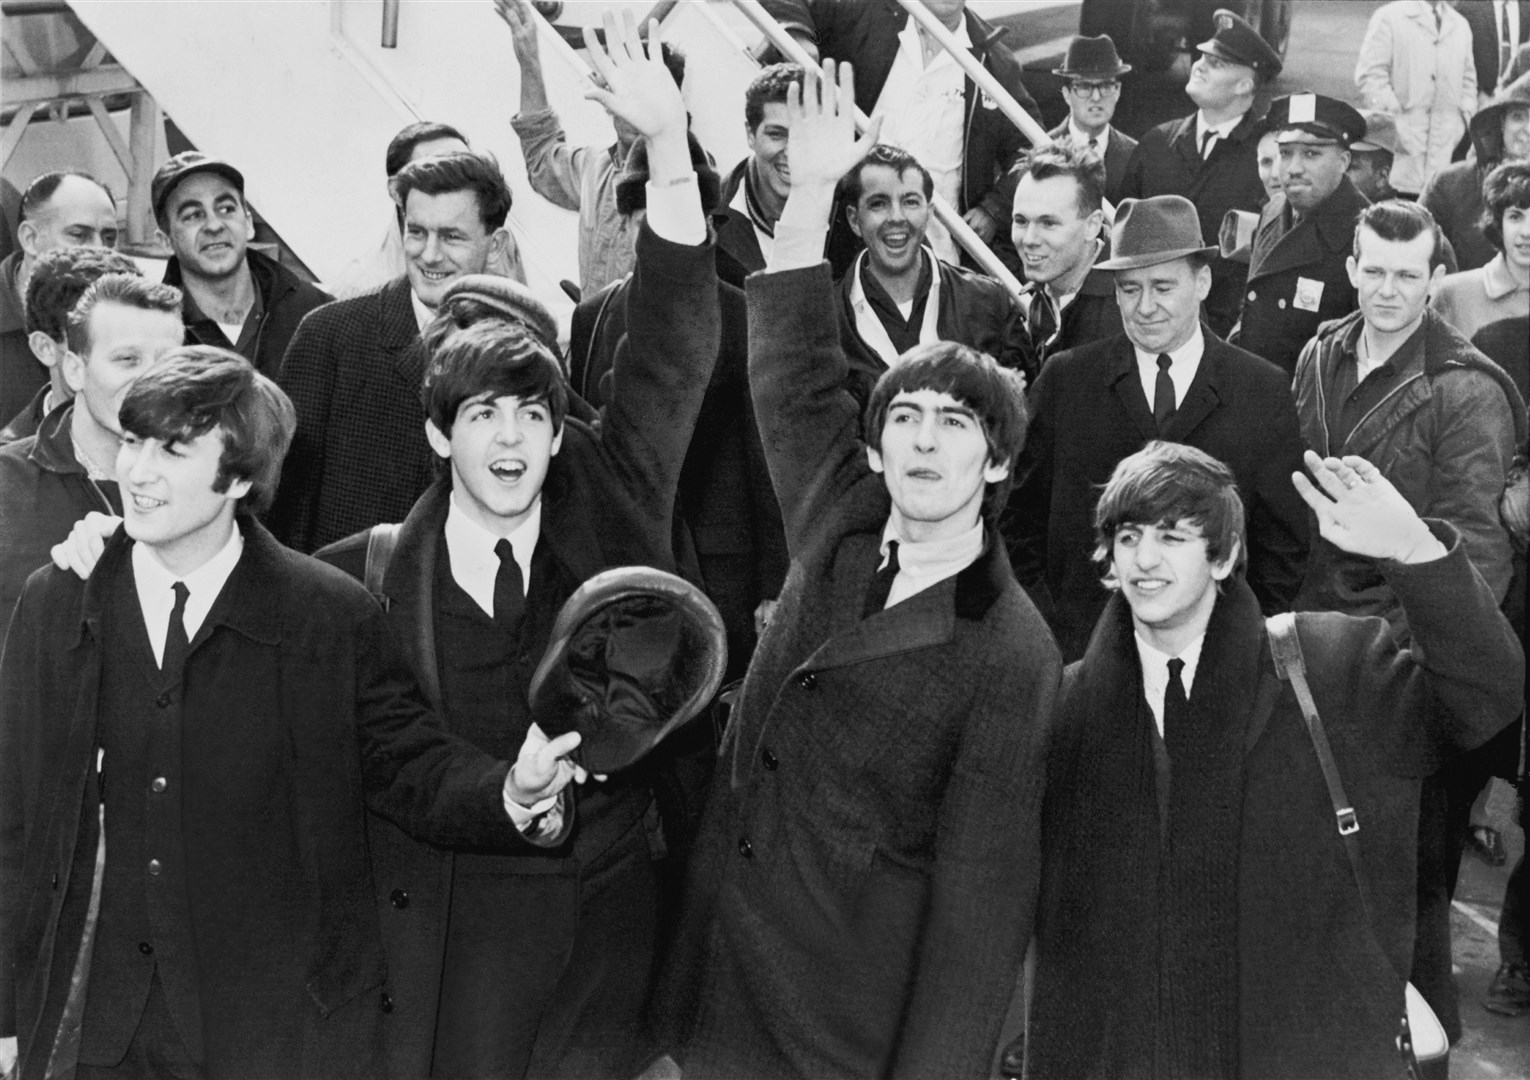 The Beatles arrive and conquer America